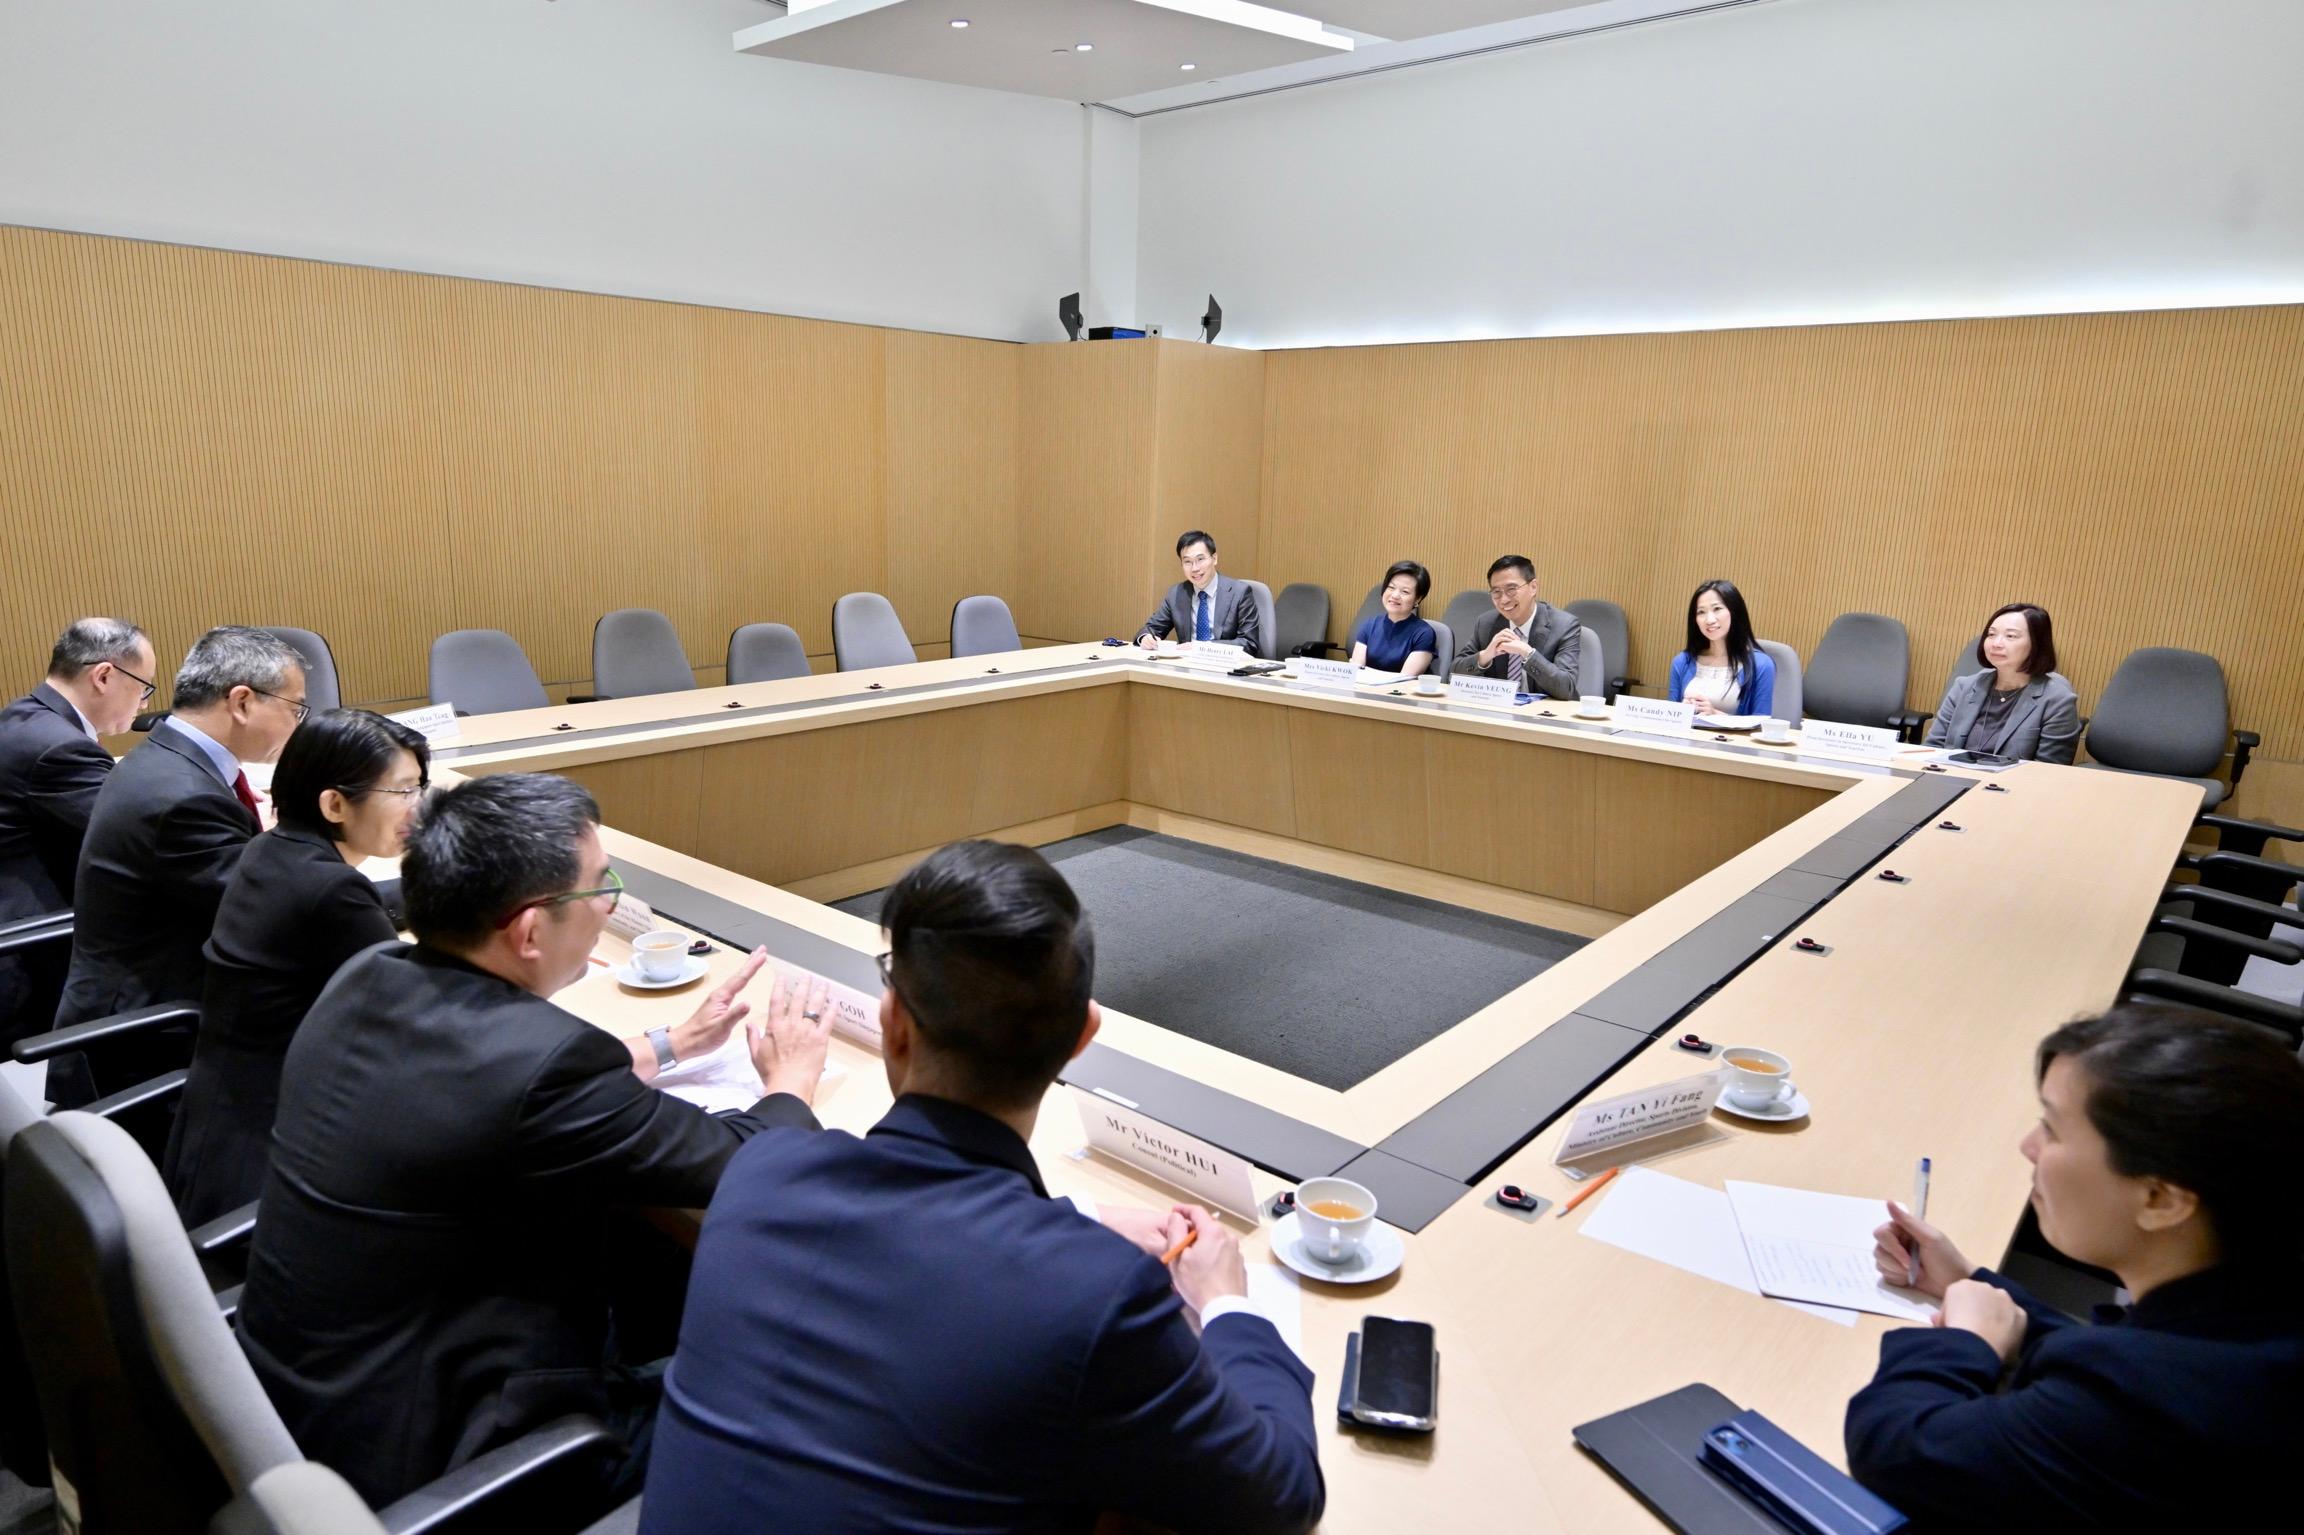 The Secretary for Culture, Sports and Tourism, Mr Kevin Yeung, today (March 27) met with Singapore's Minister for Culture, Community and Youth & Second Minister for Law, Mr Edwin Tong. Photo shows Mr Yeung (upper row, centre) briefing Mr Tong (bottom row, second left) on the latest developments of Hong Kong's cultural and sports policies.